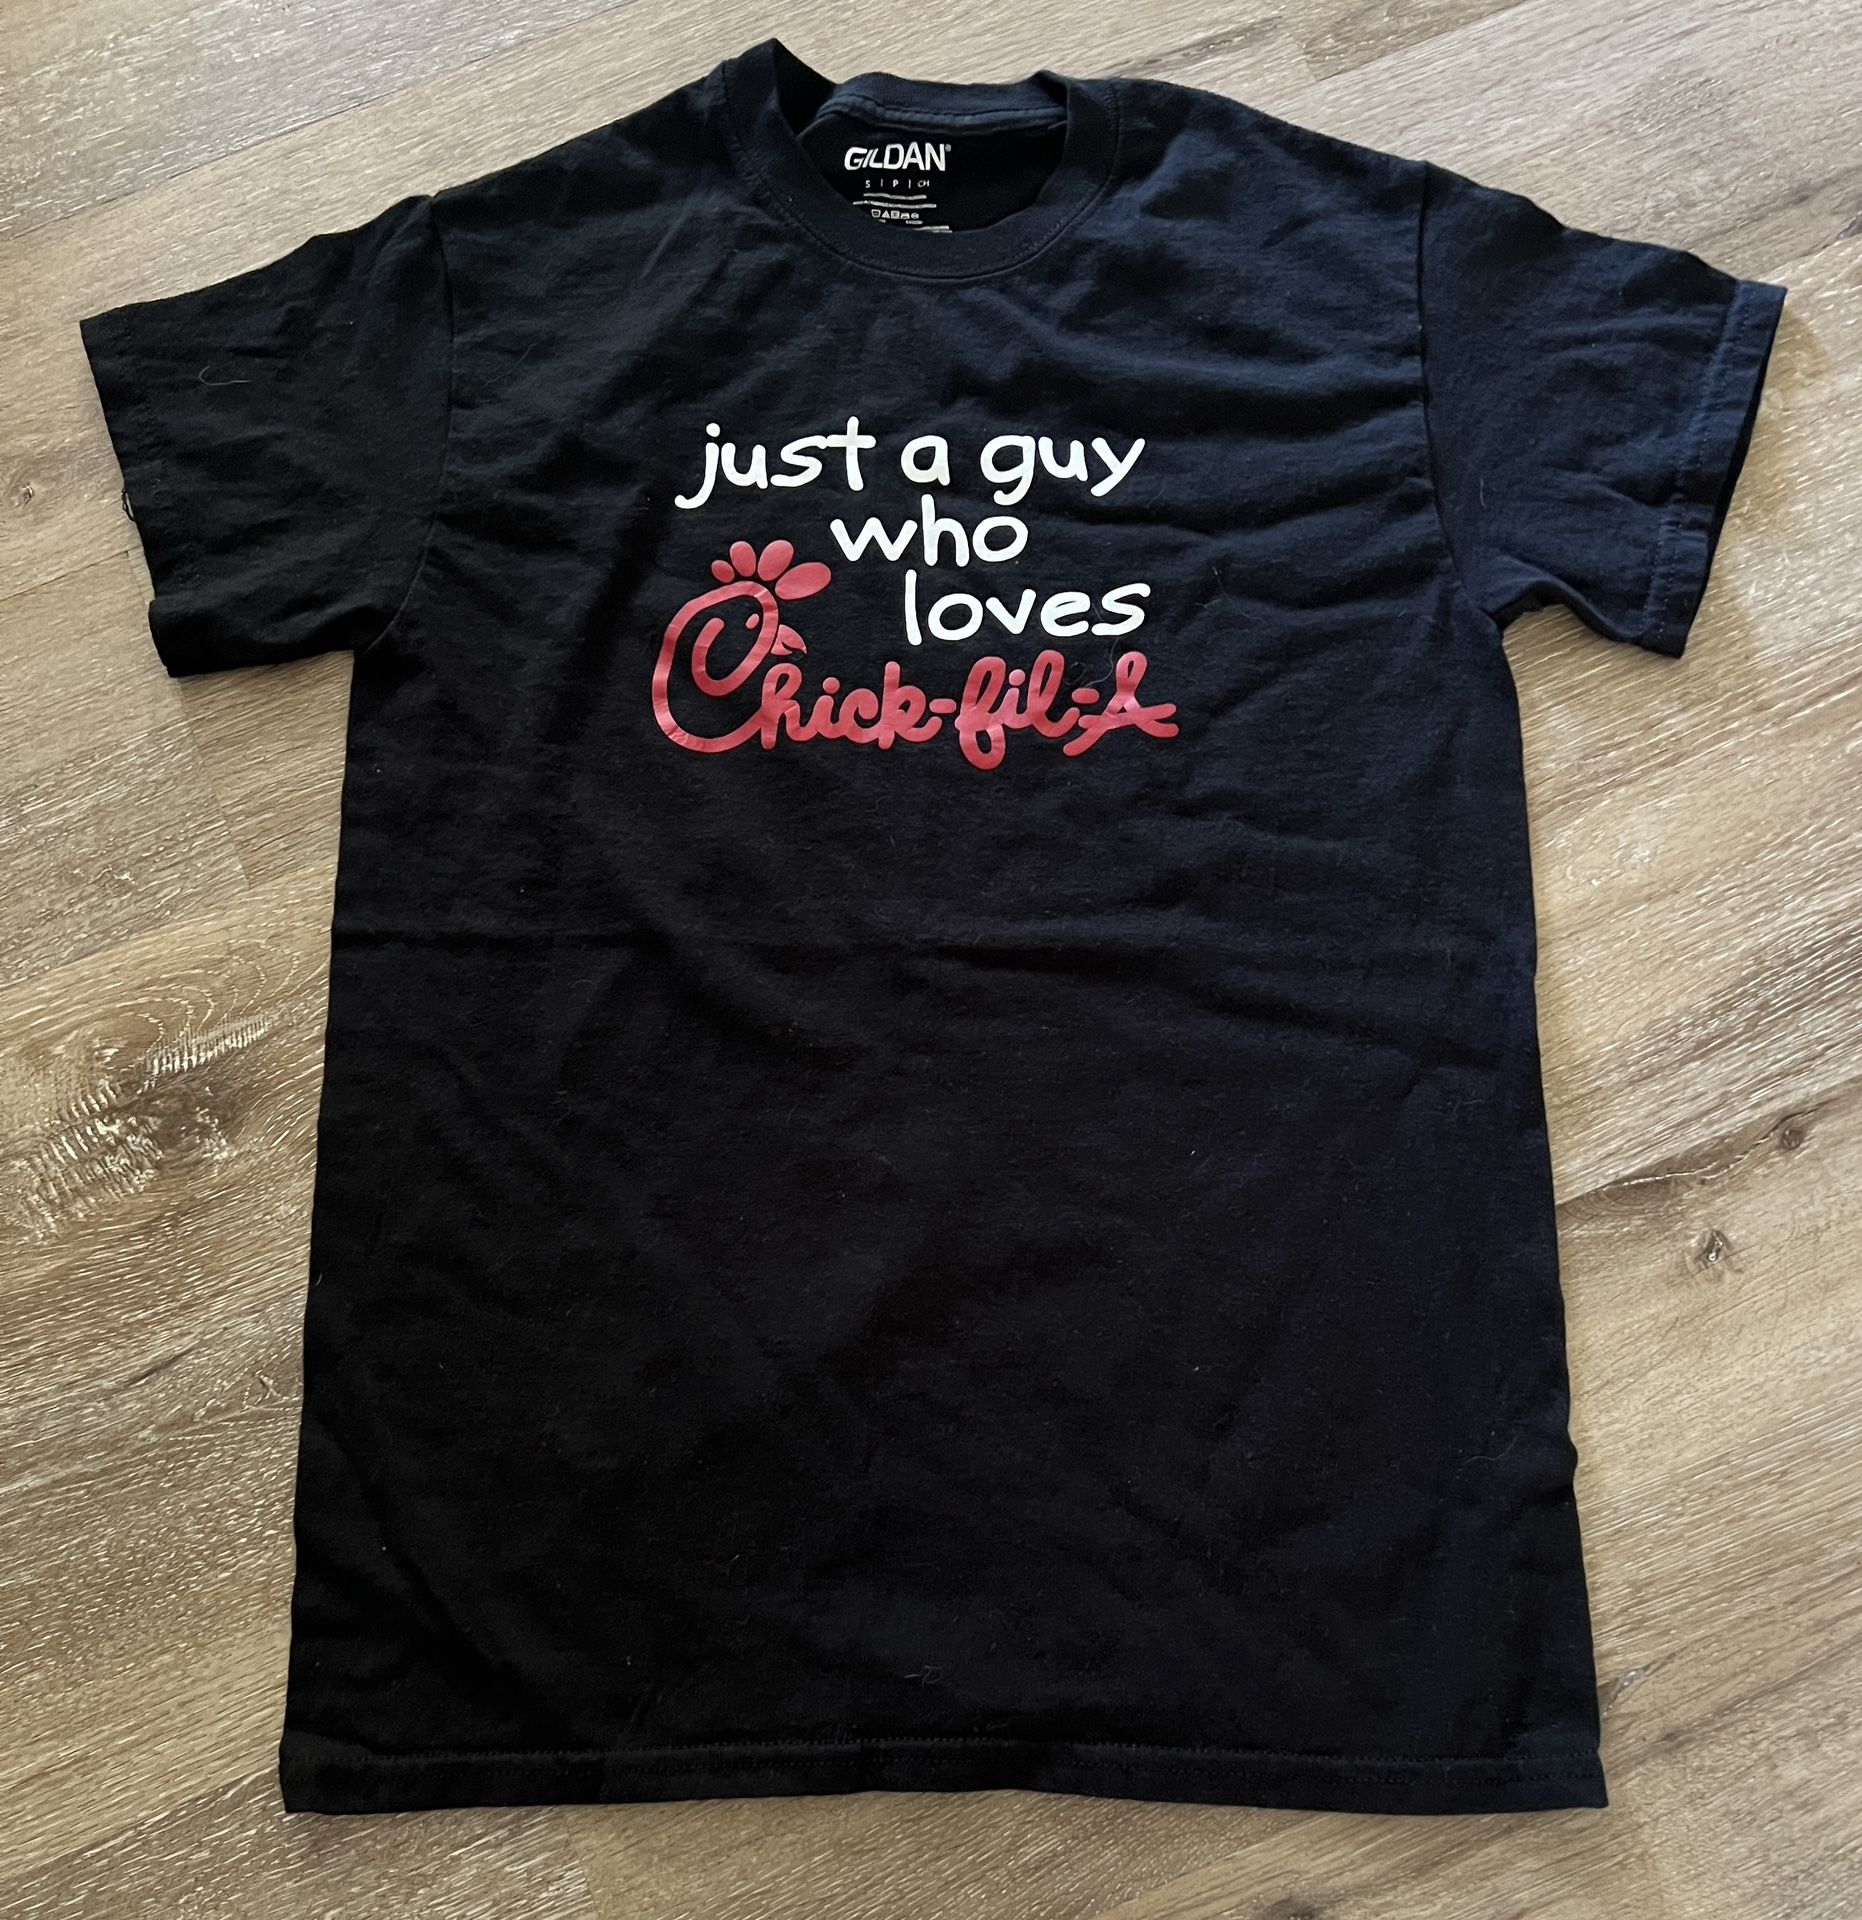 Just A Guy Who Loves Chick-Fil-A Black T-shirt Size S 